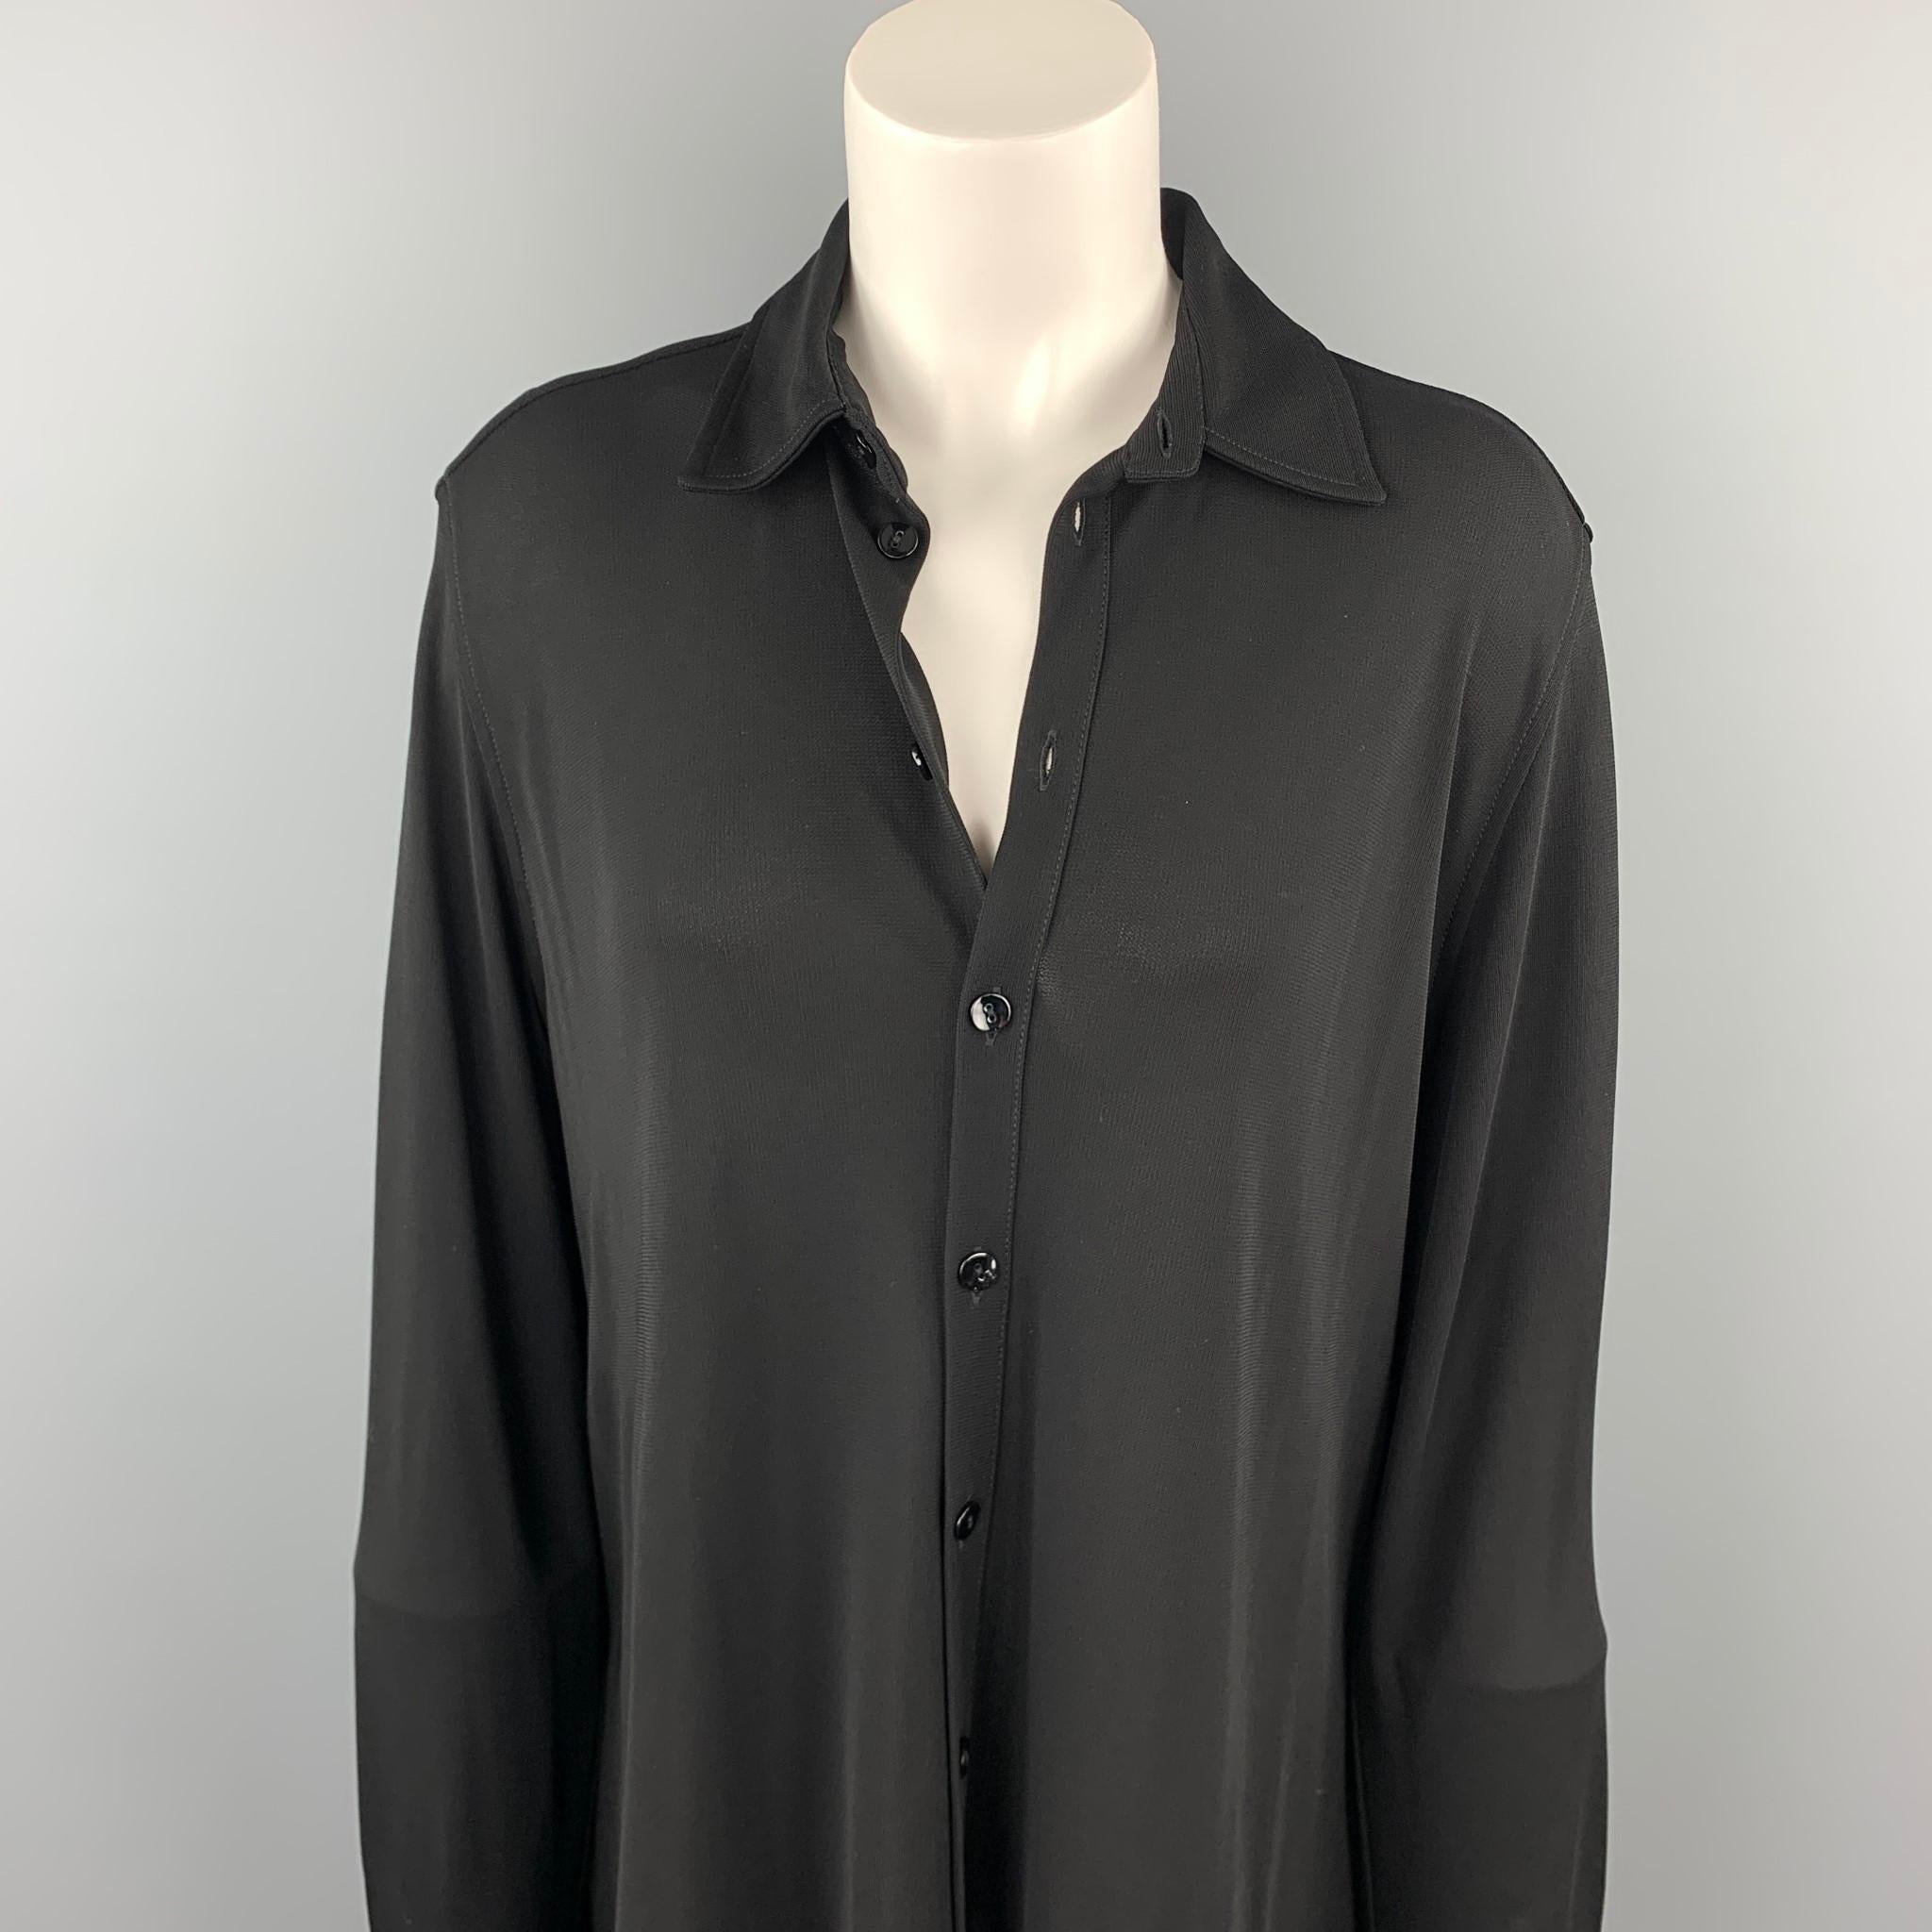 JEAN PAUL GAULTIER shirt comes in a black acetate blend featuring a button up style and a spread collar. Made in Italy.

Very Good Pre-Owned Condition.
Marked: I 42 / D 38 / F 38 / GB 10 / USA 8

Measurements:

Shoulder: 17 in. 
Bust: 42 in.